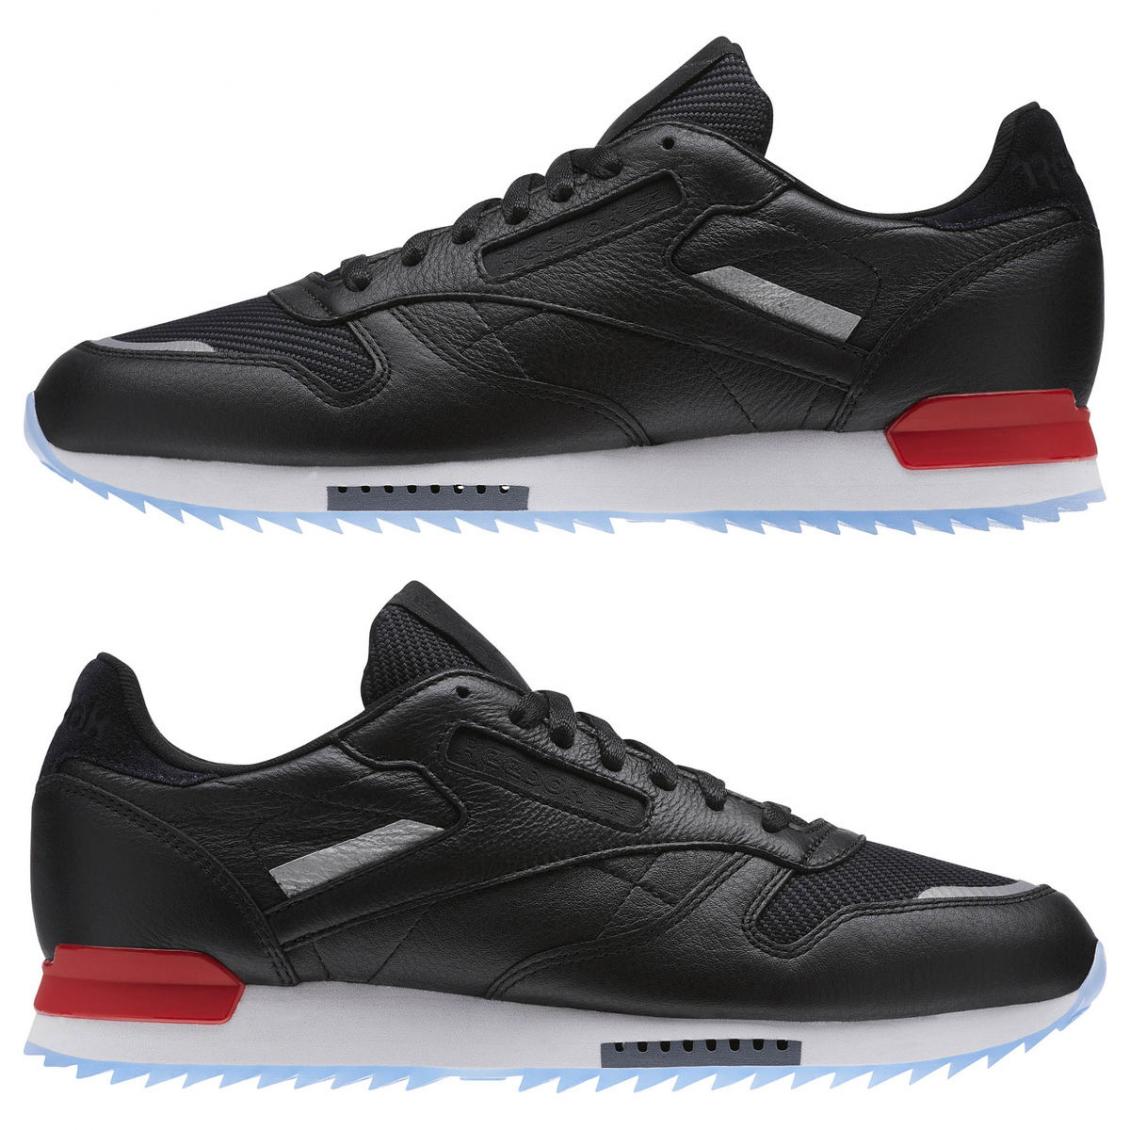 Black – Reebok Classic Leather Ripple Low BP Mens Black / White / Primal Red / Asteroid Dust / Ice